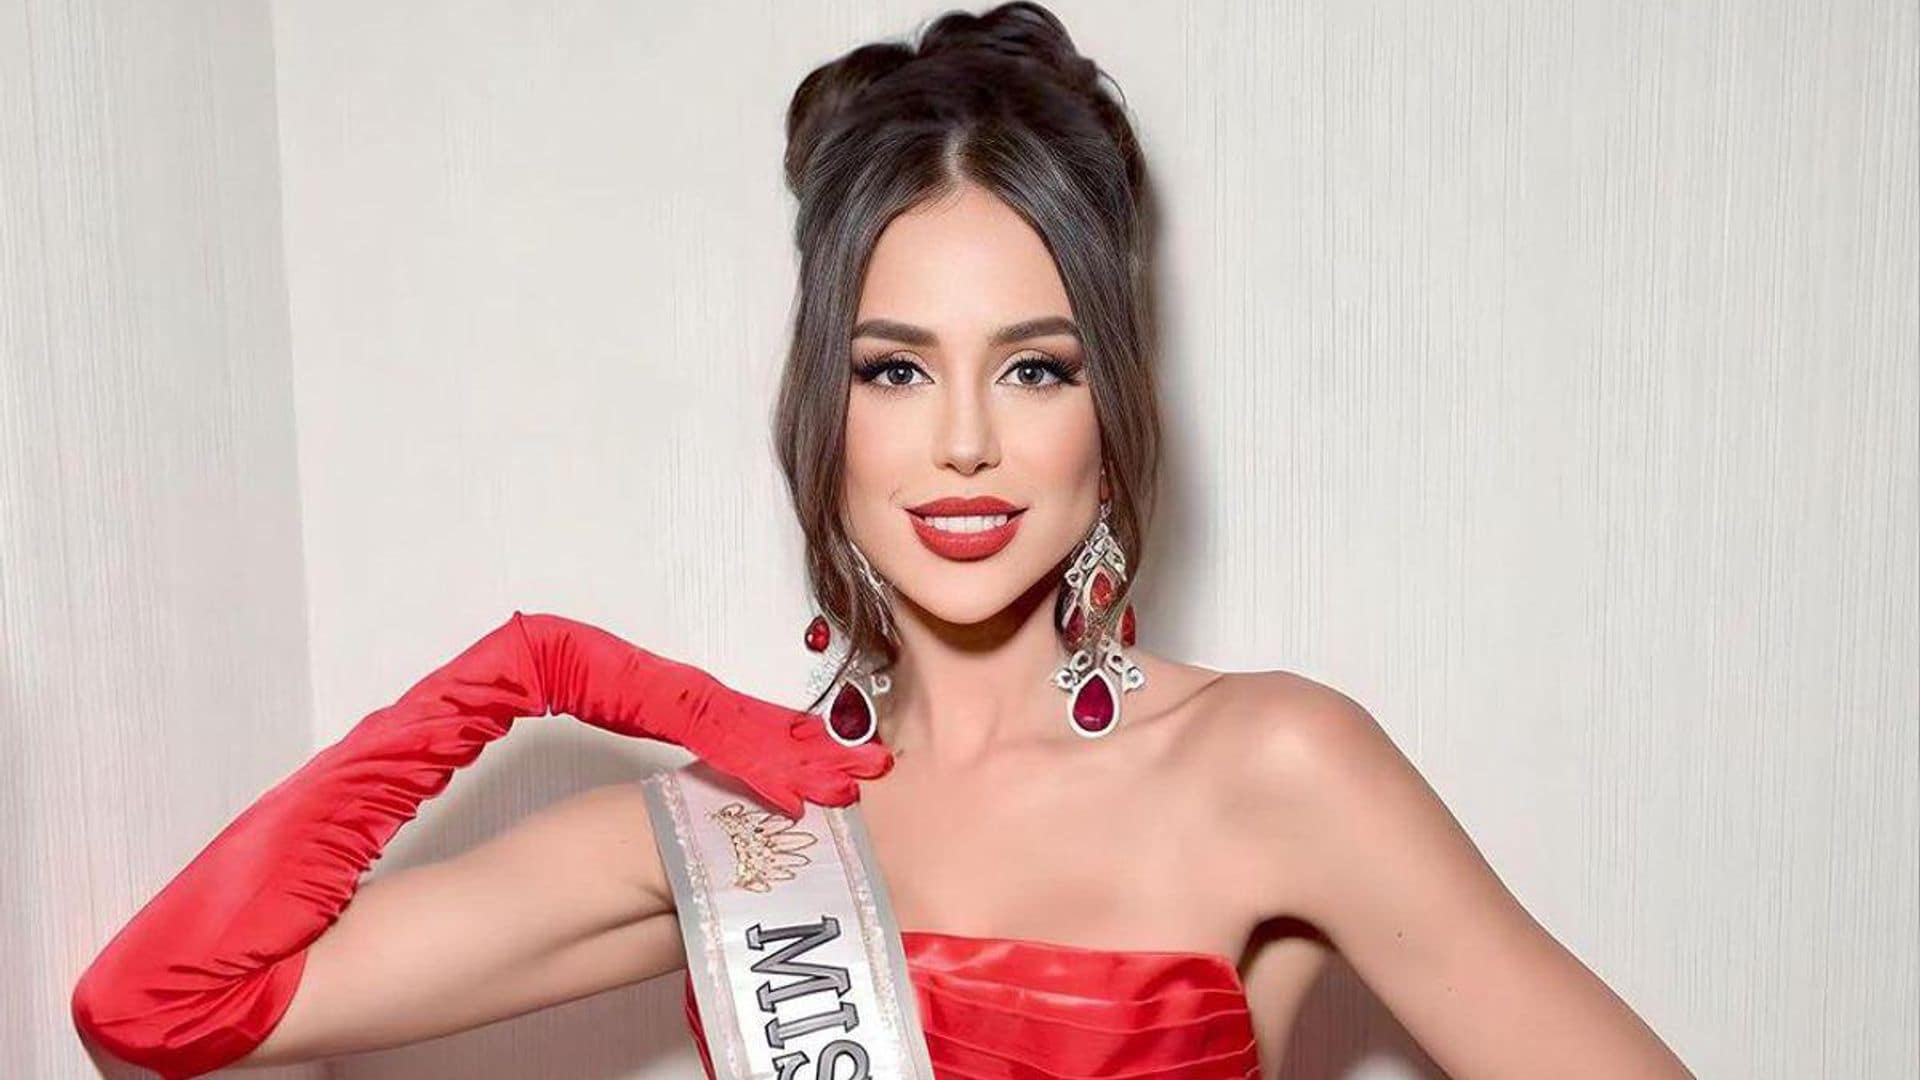 Miss Venezuela, Diana Silva, on her legacy: ‘It’s pressure, it’s a responsibility, but above all, blessed to represent my country’